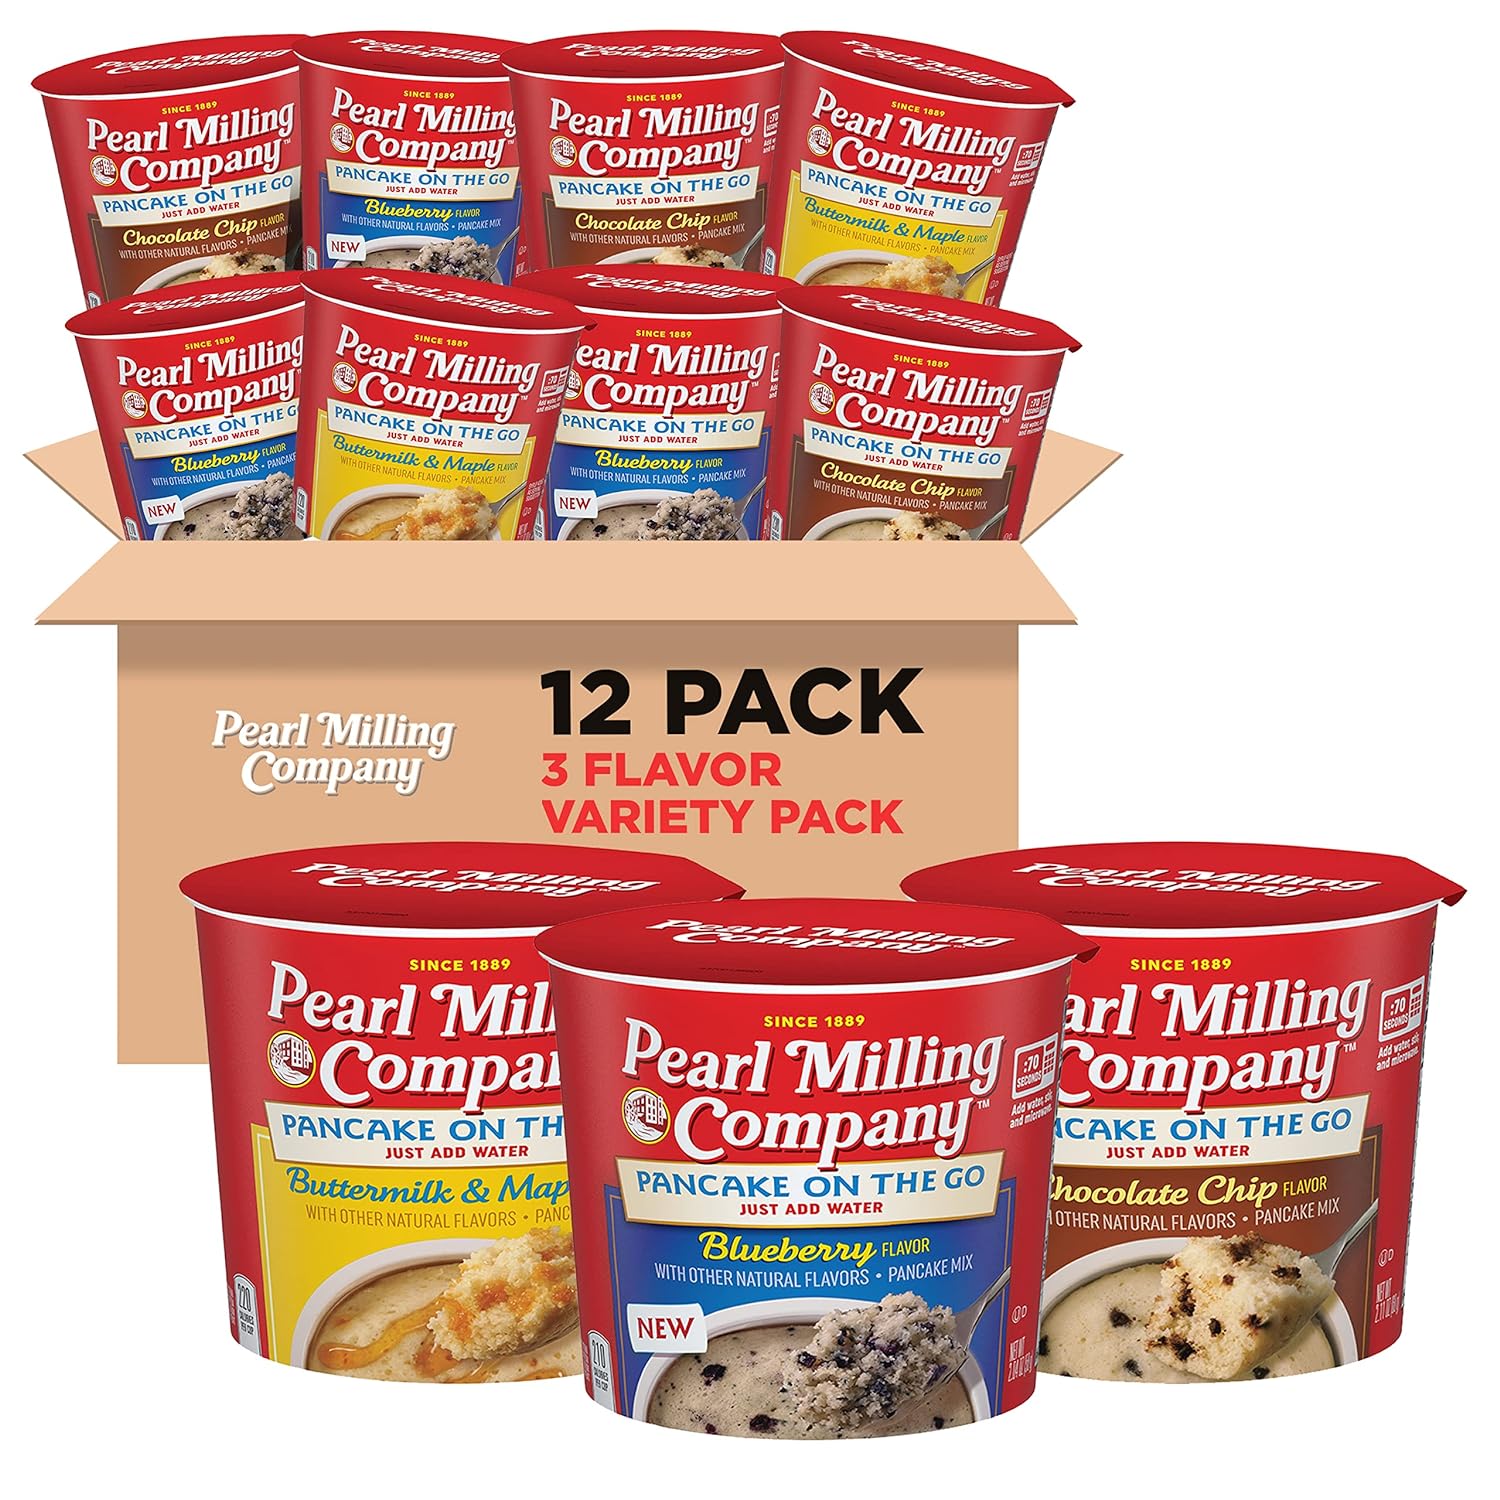 Pearl Milling Company Cups 3 Flavor Variety Pack